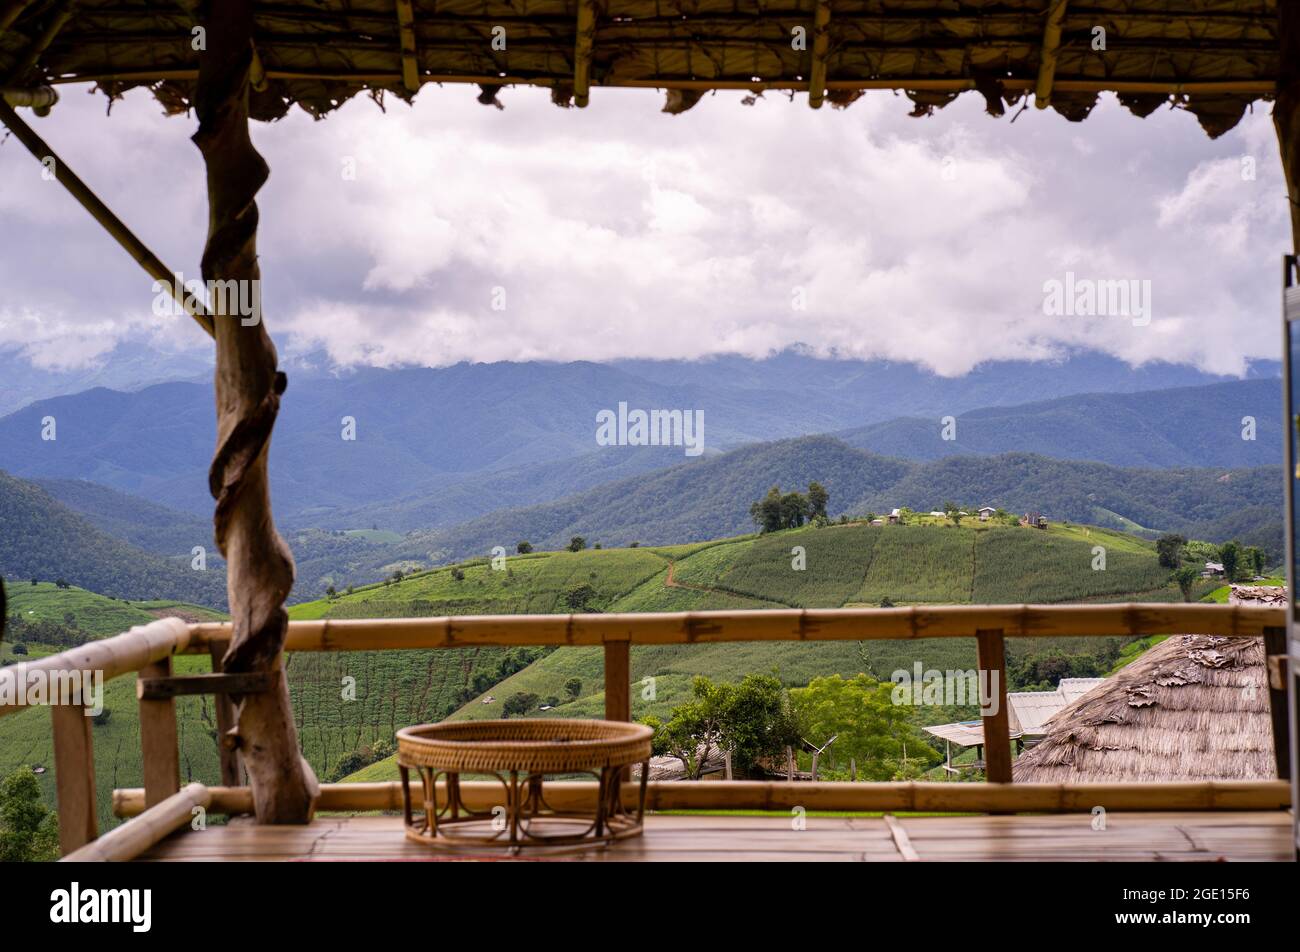 A wooden cottage on top of the hill against a mountainscape under a cloudy sky Stock Photo